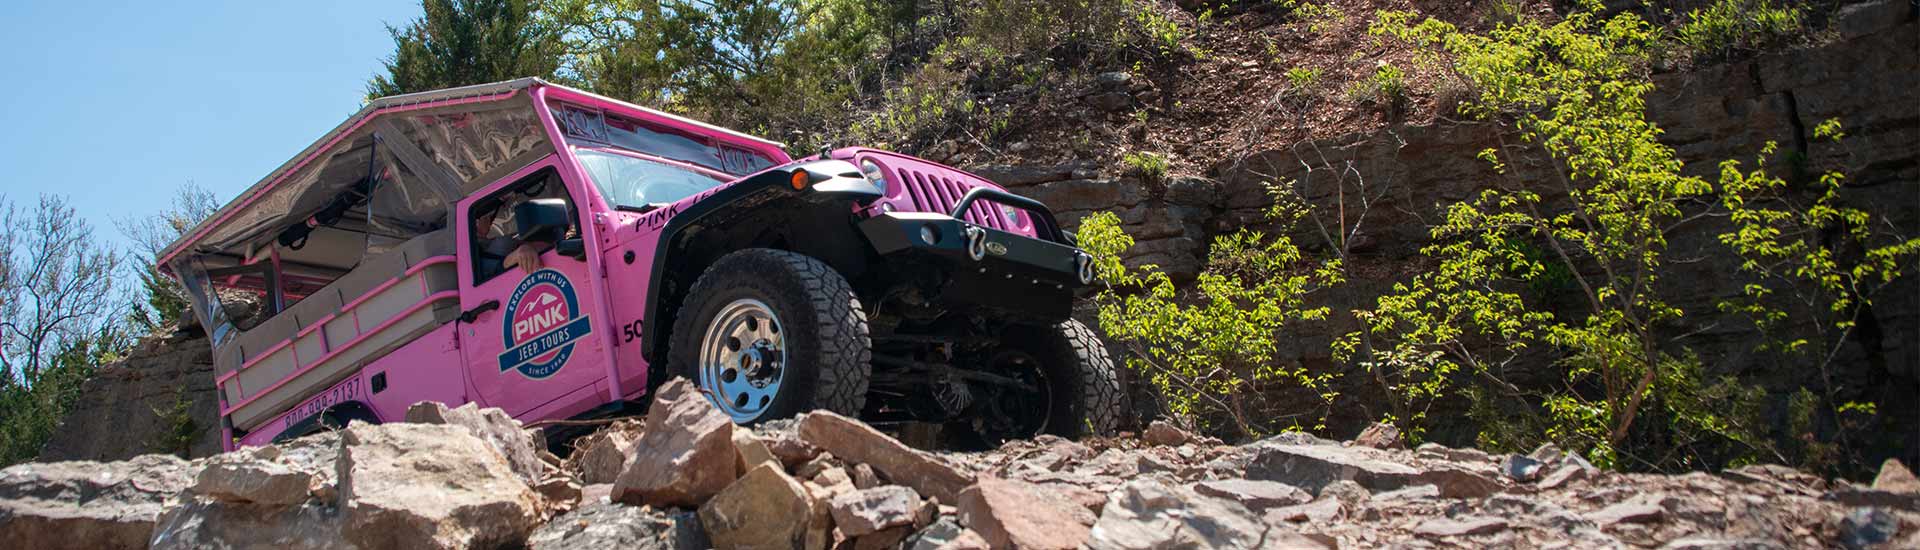 Header image of a Pink Jeep Wrangler navigating up a steep, boulder-strewn trail in the Baird Mountain Quarry, Branson, MO.